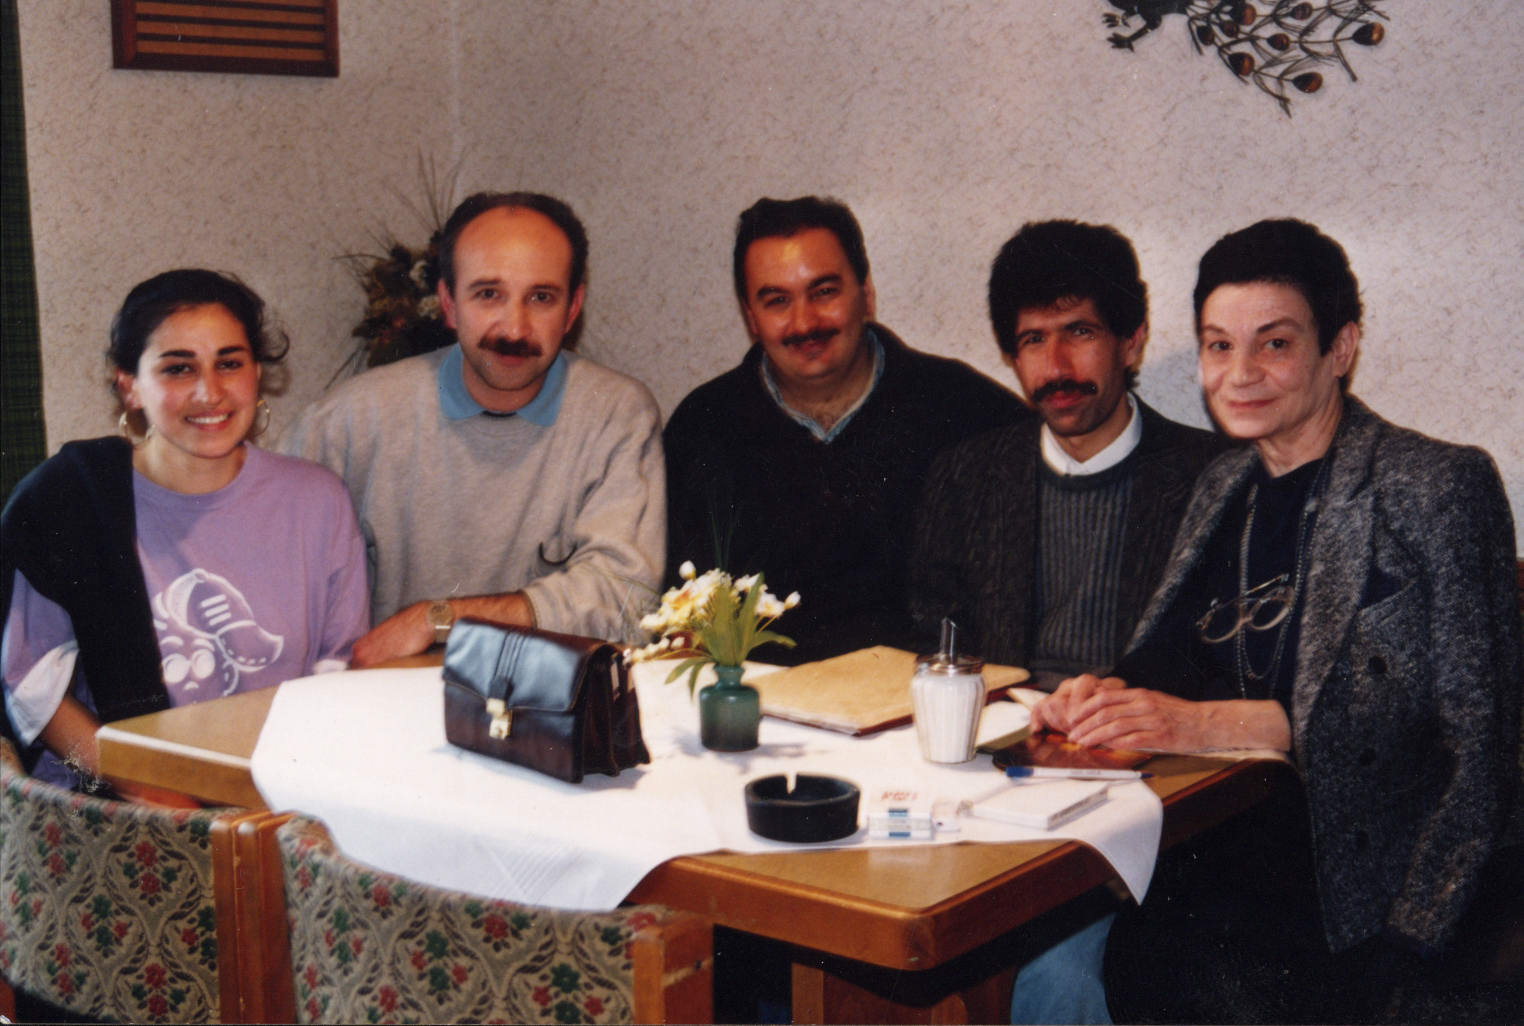 1990: In 1988, migrants from Turkey developed the idea of creating a publicly accessible archive about migration from Turkey. The original vision was to establish a Europe-wide center. Later, migration in Germany became the core of the concept. The photo shows from left to right Sevtap Sezer, Aytaç Eryılmaz, Muhittin Demiray, Ahmet Sezer and Gönül Göhler. Photo: DOMiD Archive, Cologne